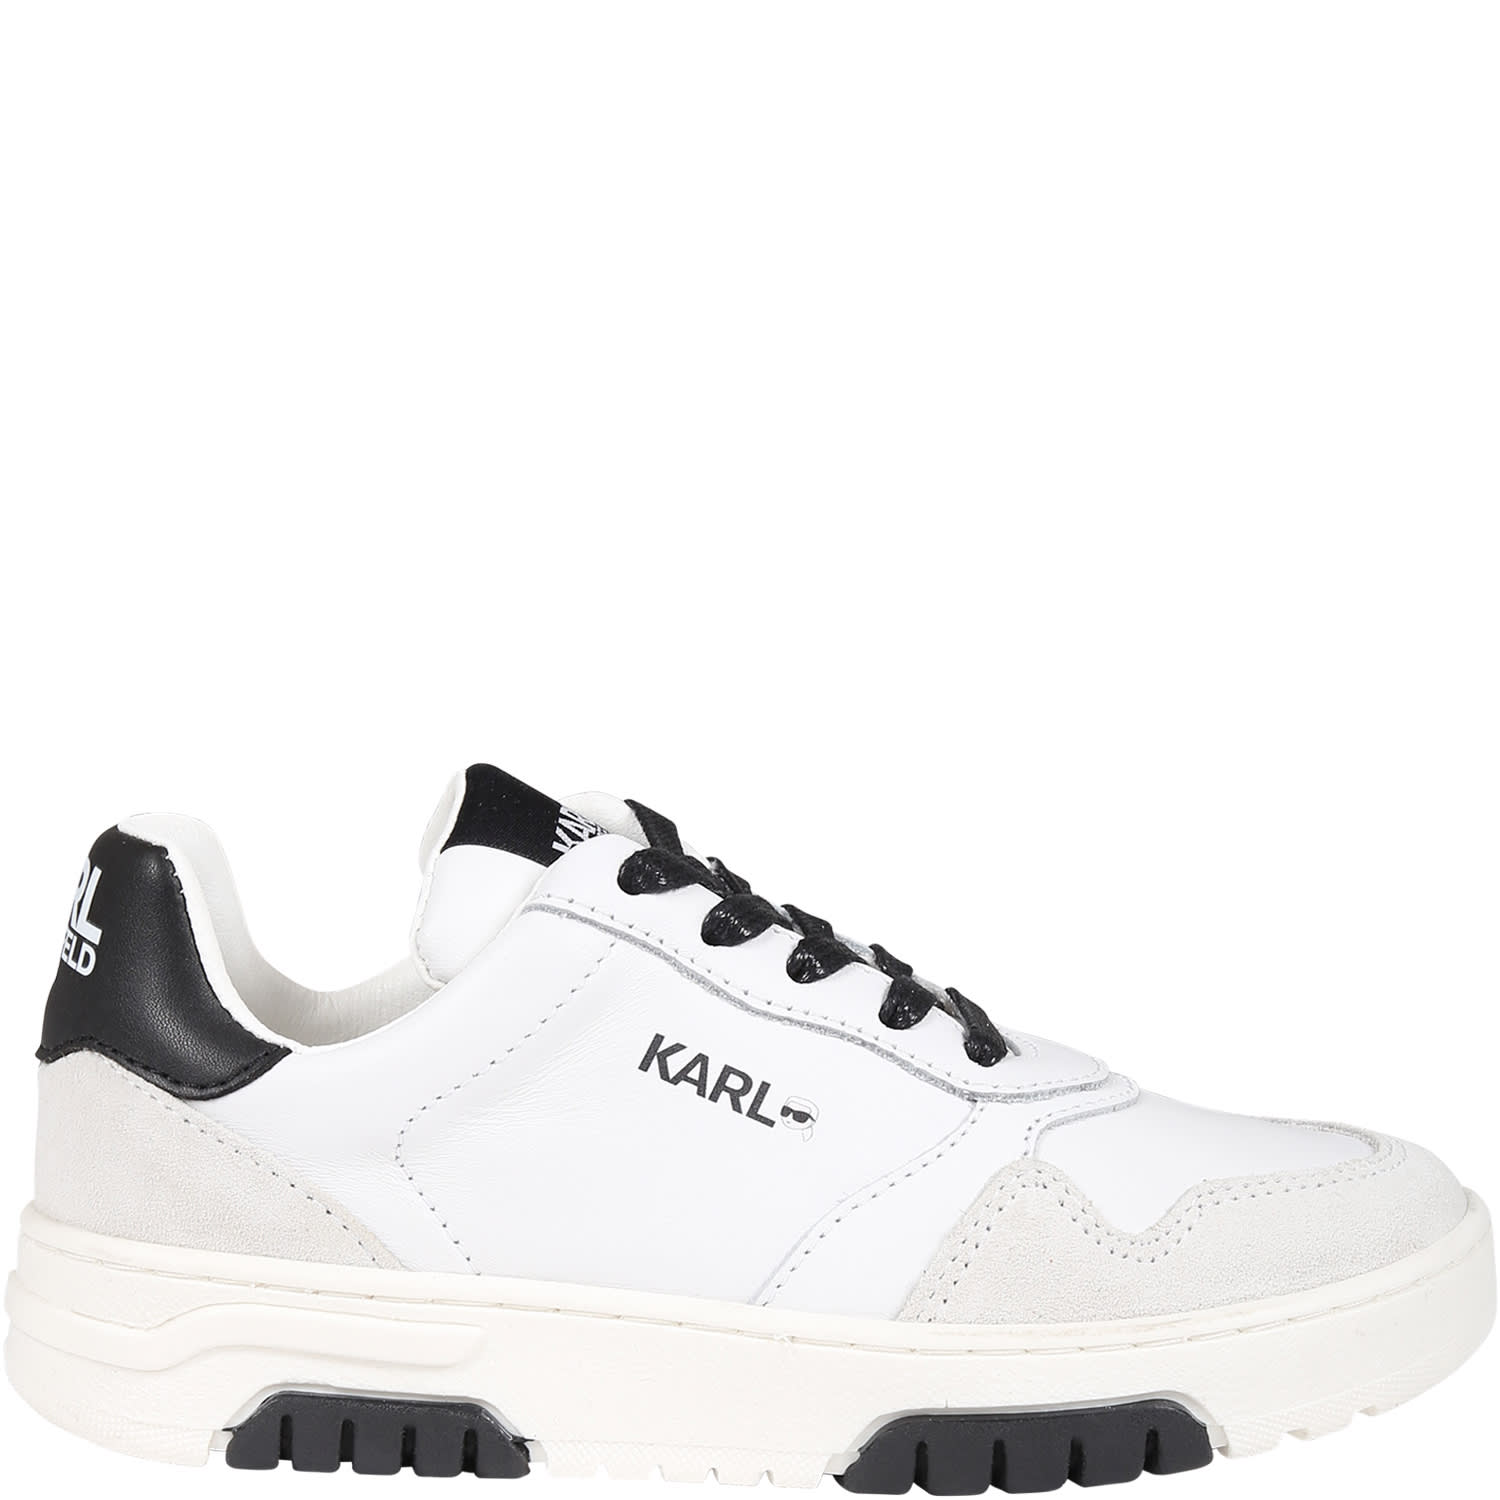 KARL LAGERFELD WHITE SNEAKERS FOR KIDS WITH LOGO